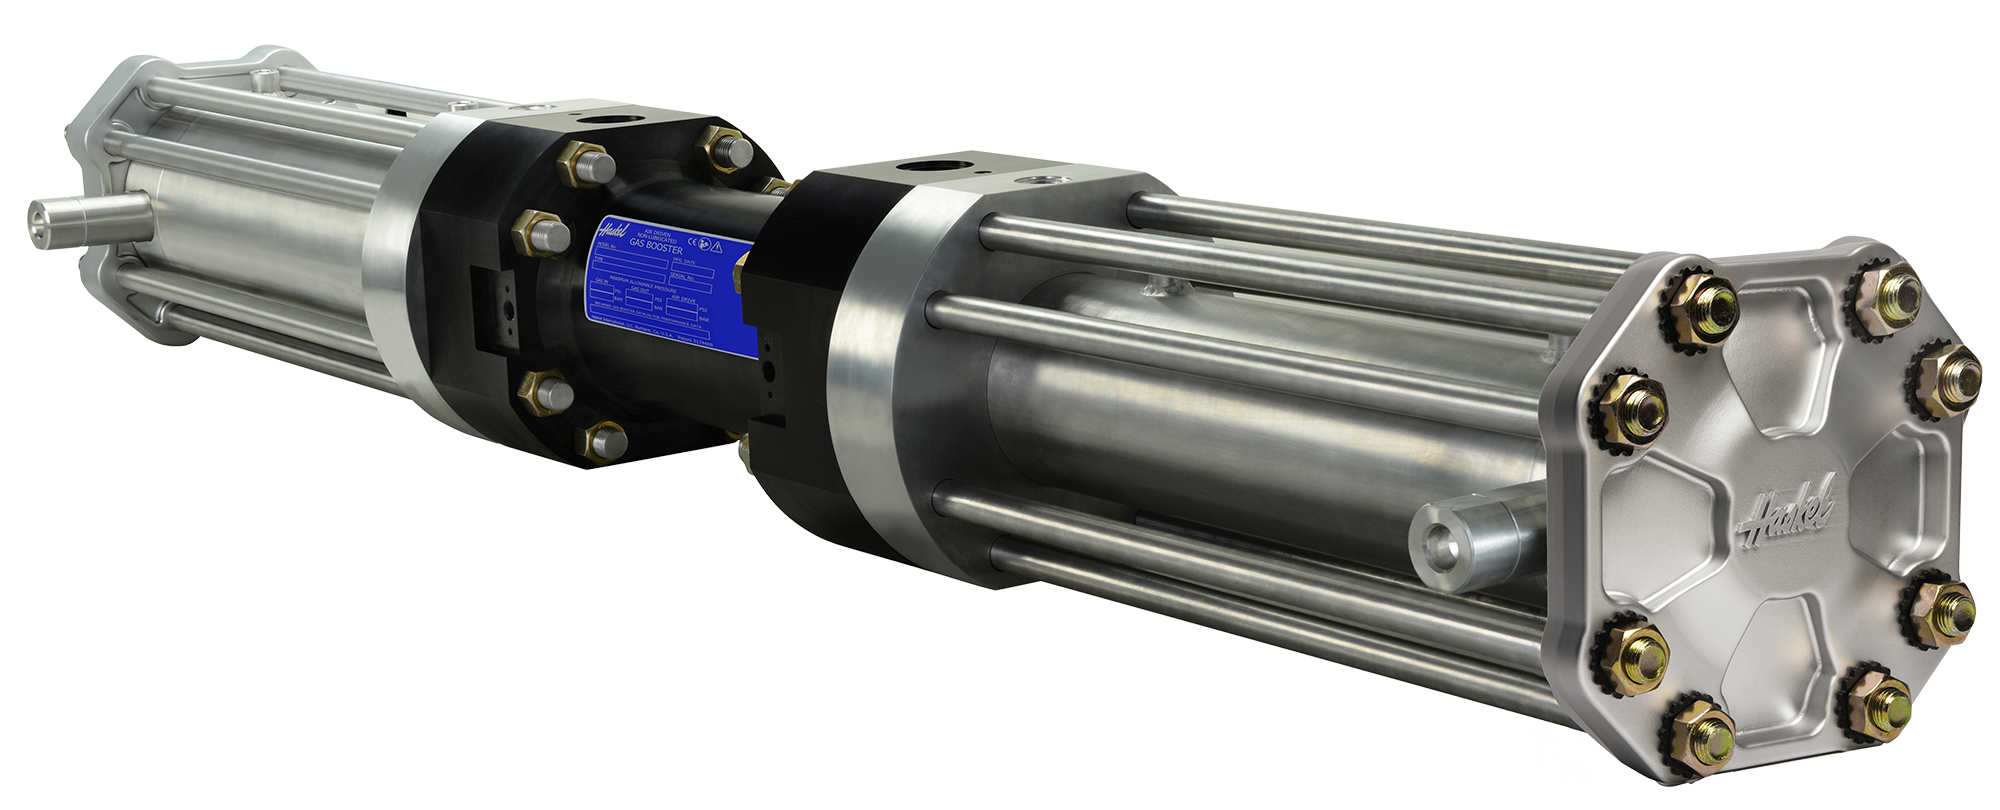 H-Drive Series of Gas Boosters by Haskel Suits Challenging Applications